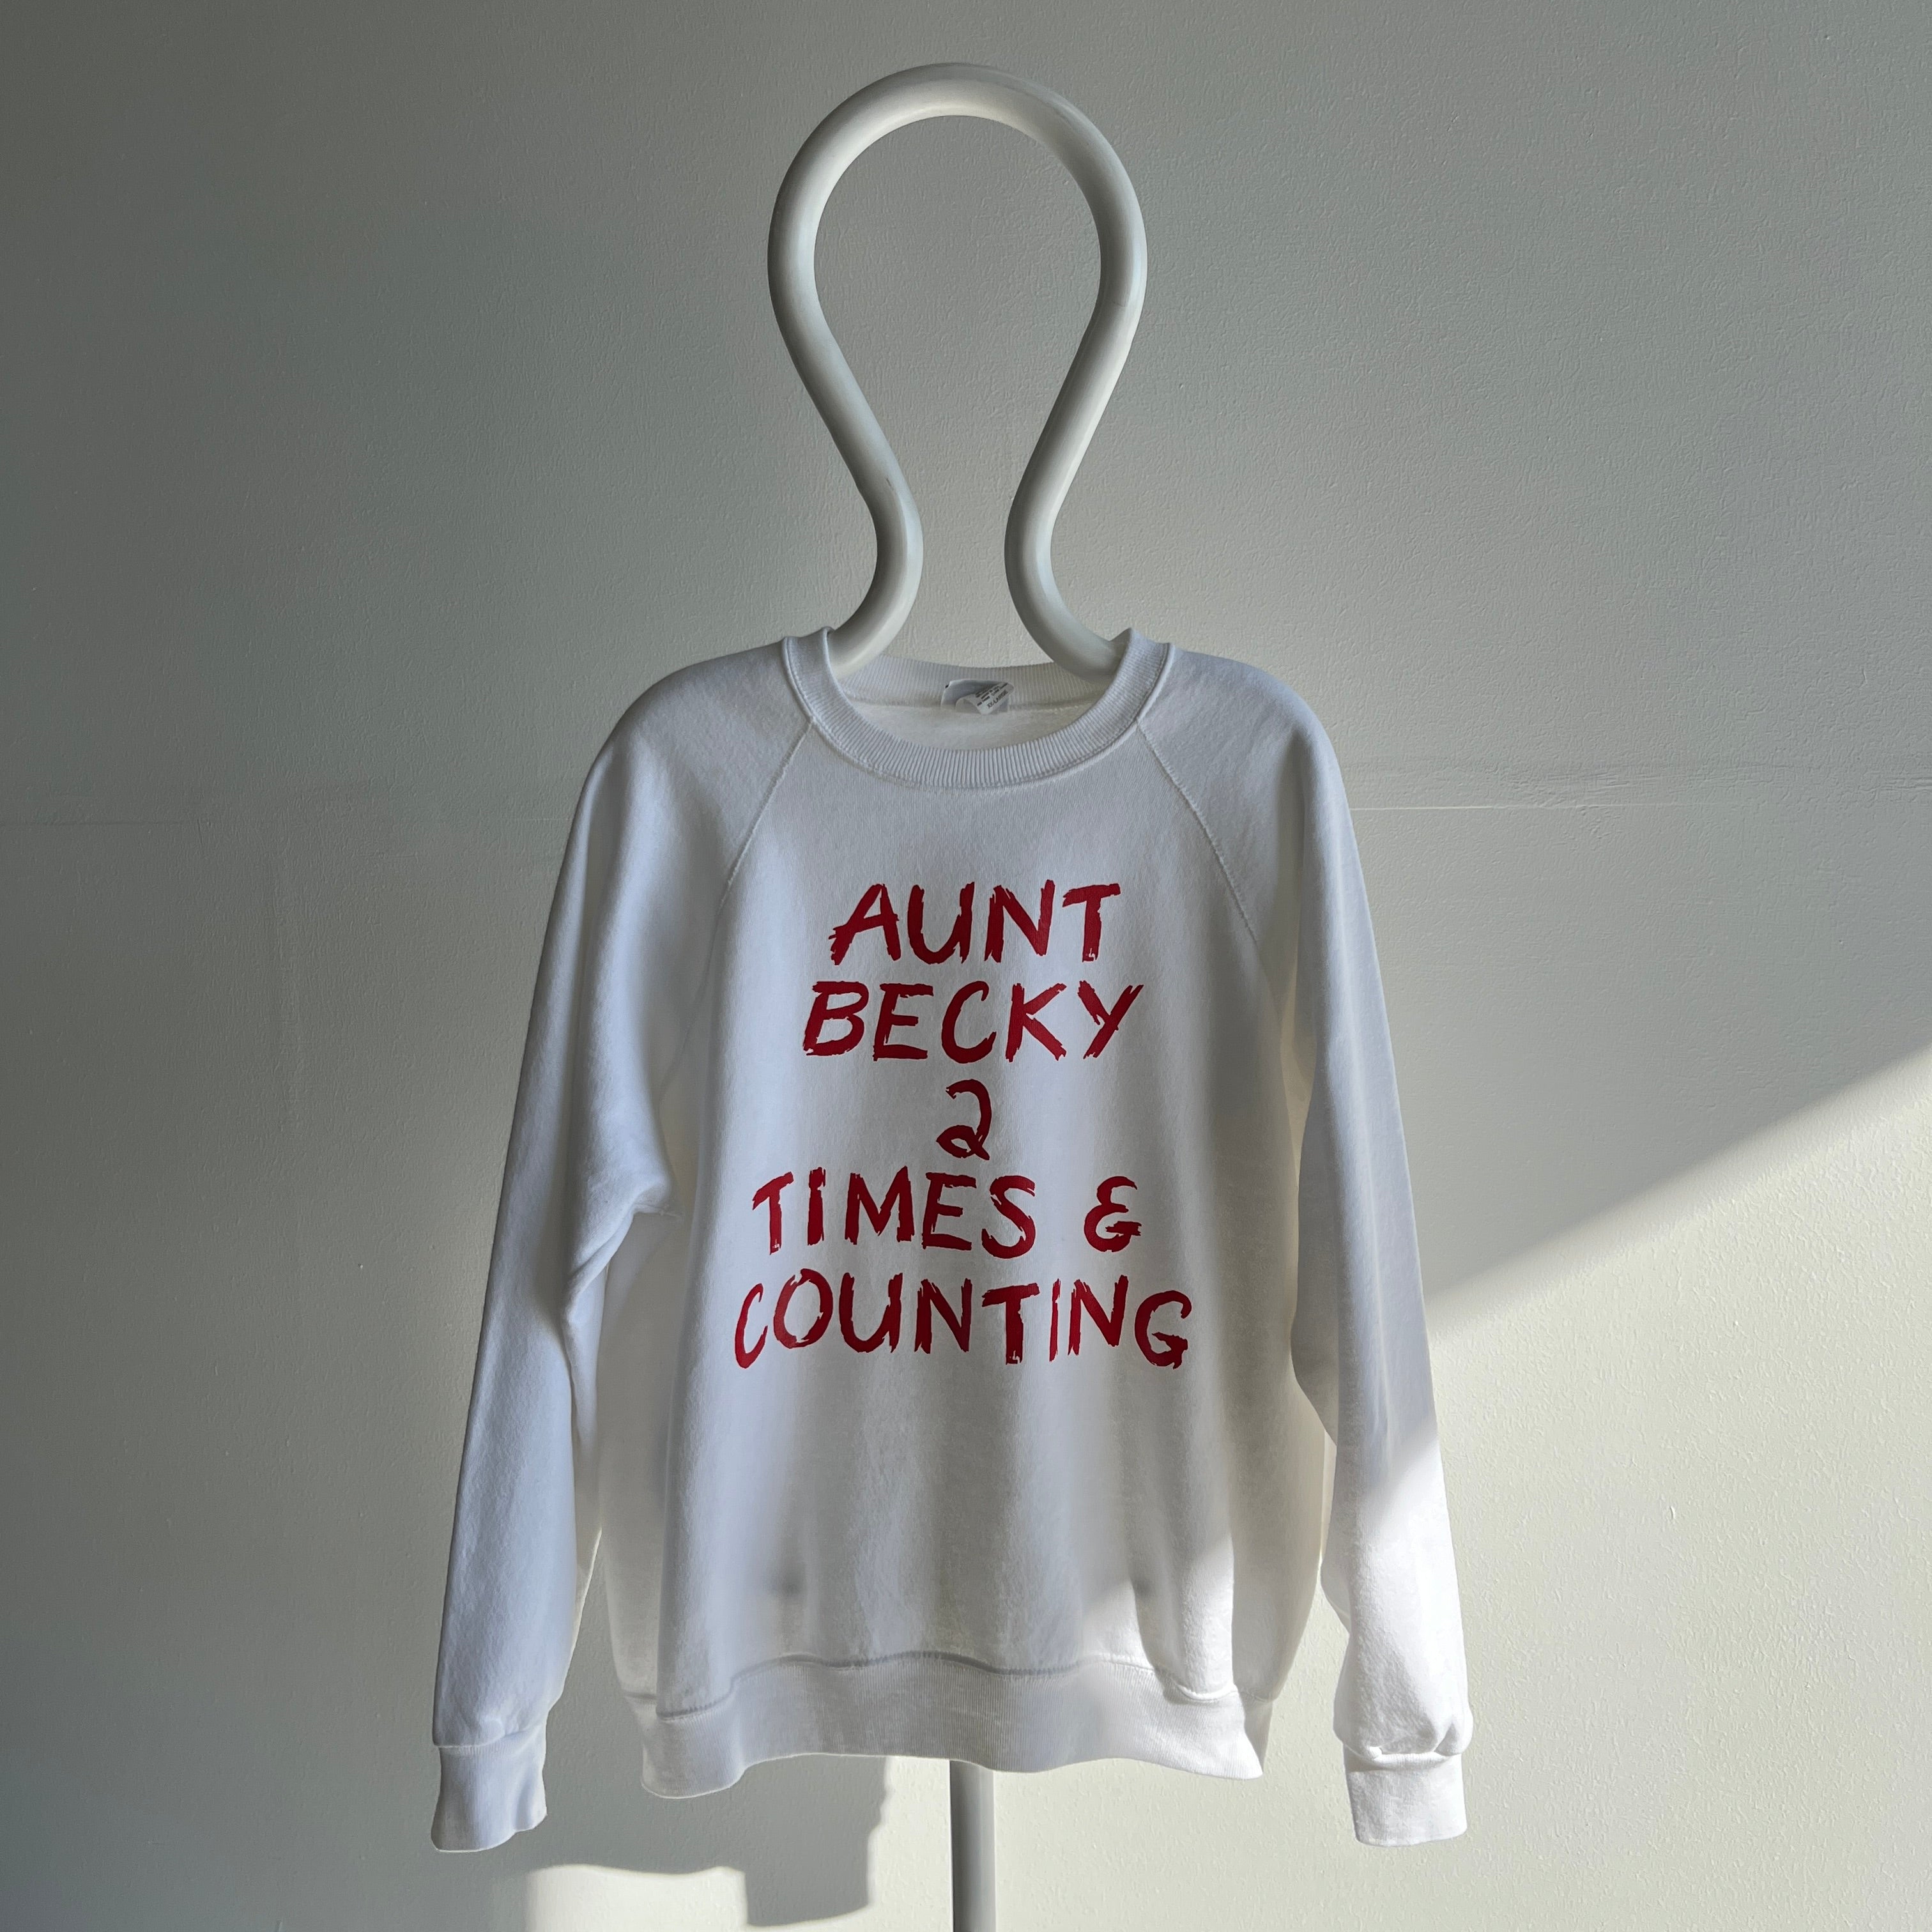 1980s Sweatshirt That's Going to A Real Aunt Becky 2x And Counting